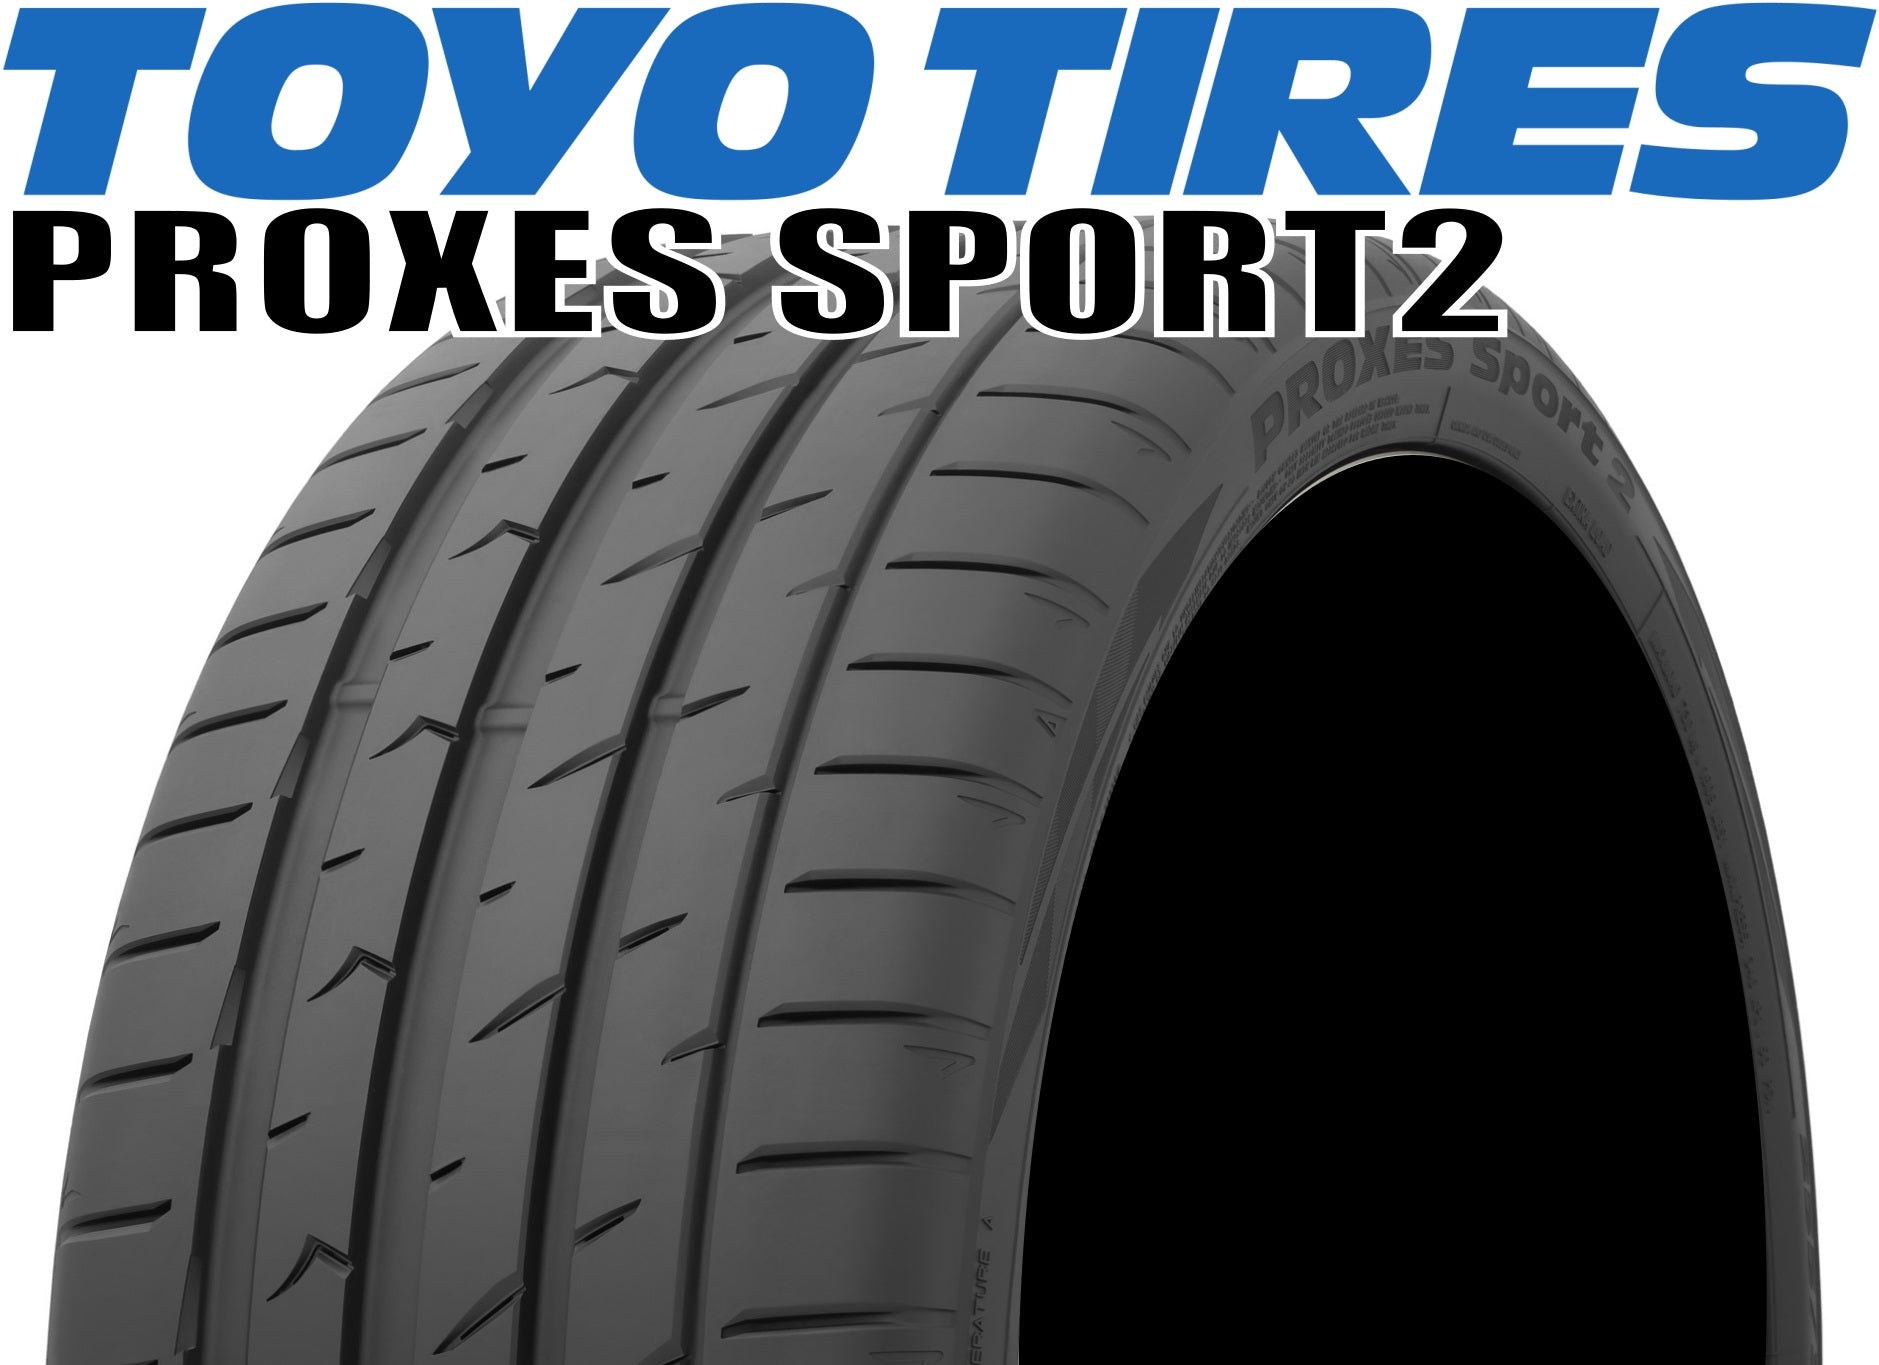 TOYO TIRES PROXES SPORT2(トーヨー プロクセススポーツ) 245/45R17 99Y XL (245/45-17 9